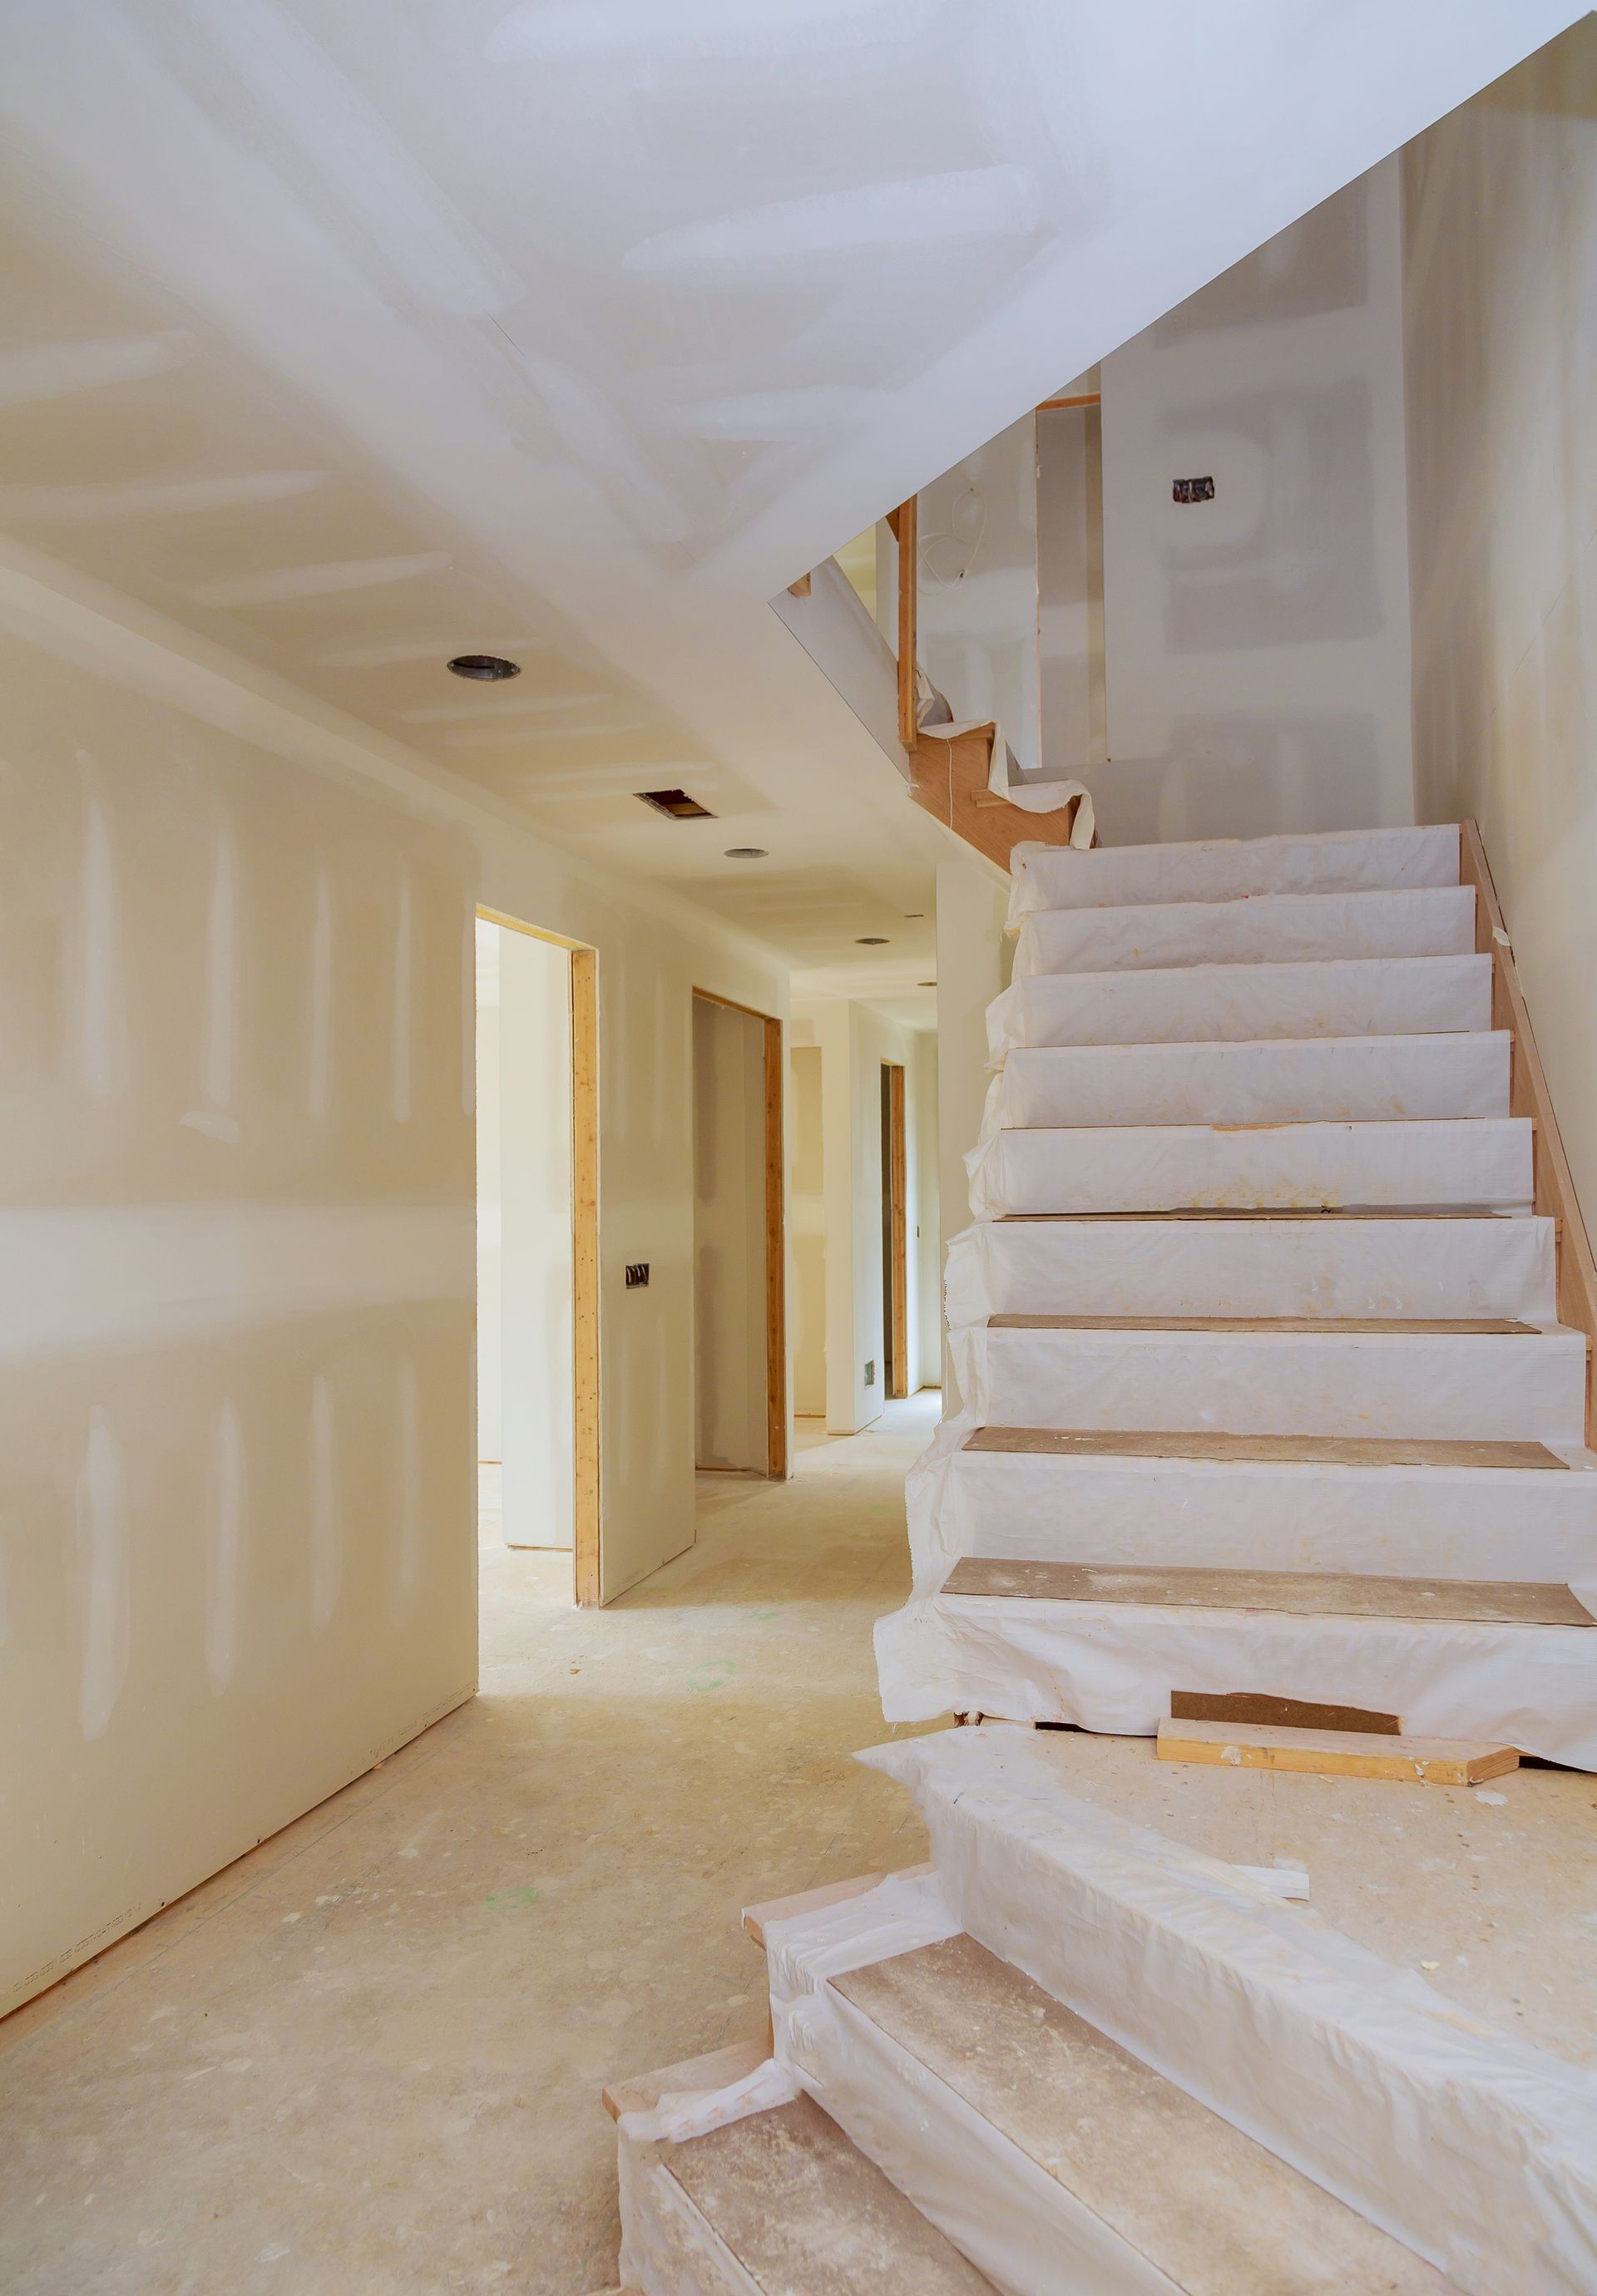 Interior new home construction of housing project with drywall installed